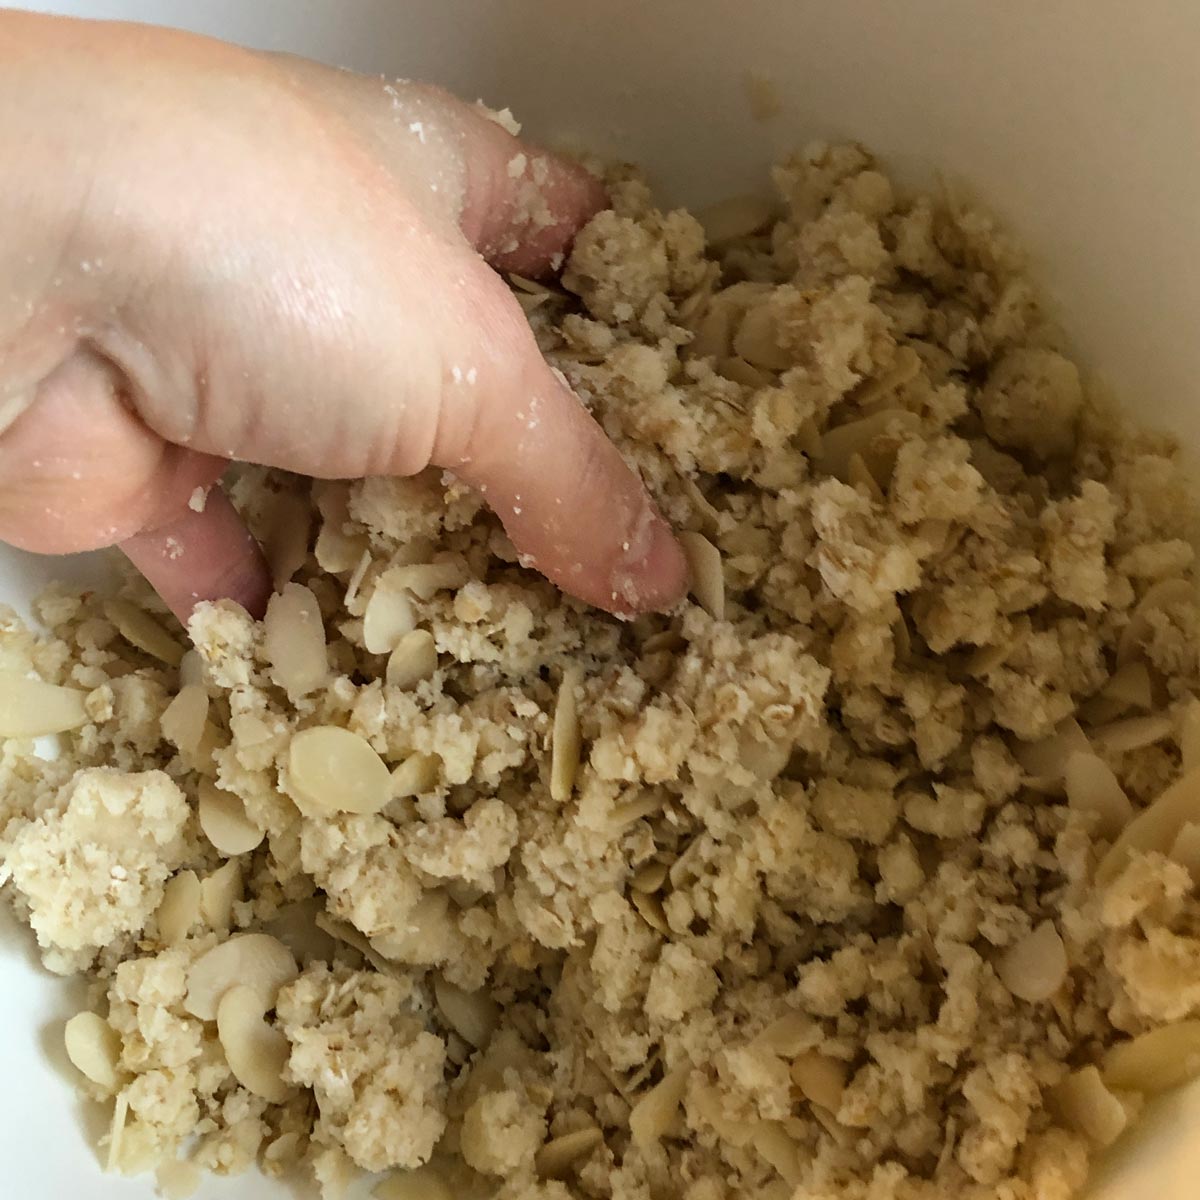 Mixing crumble topping.